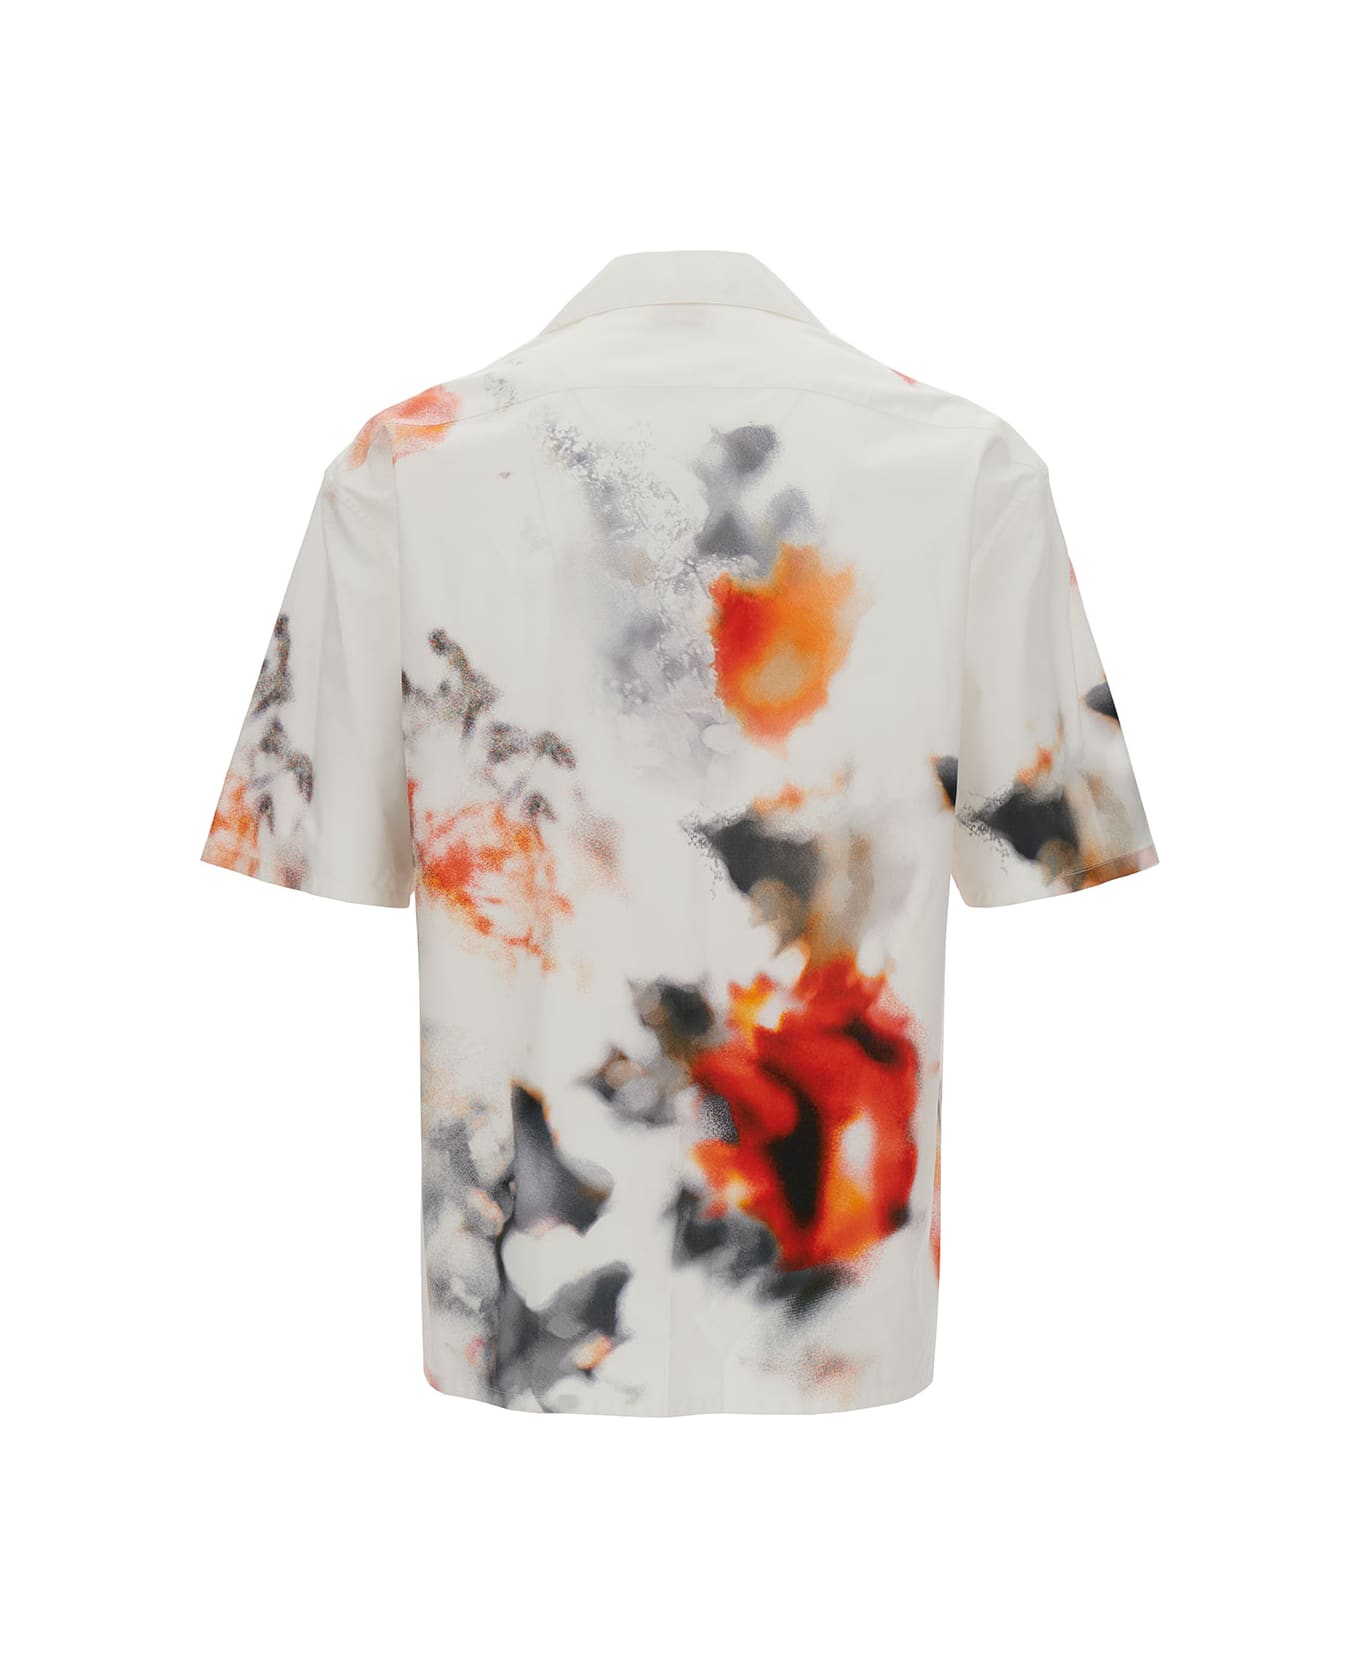 Alexander McQueen White Bowling Shirt With Multicolor Print In Cotton Man - Multicolor